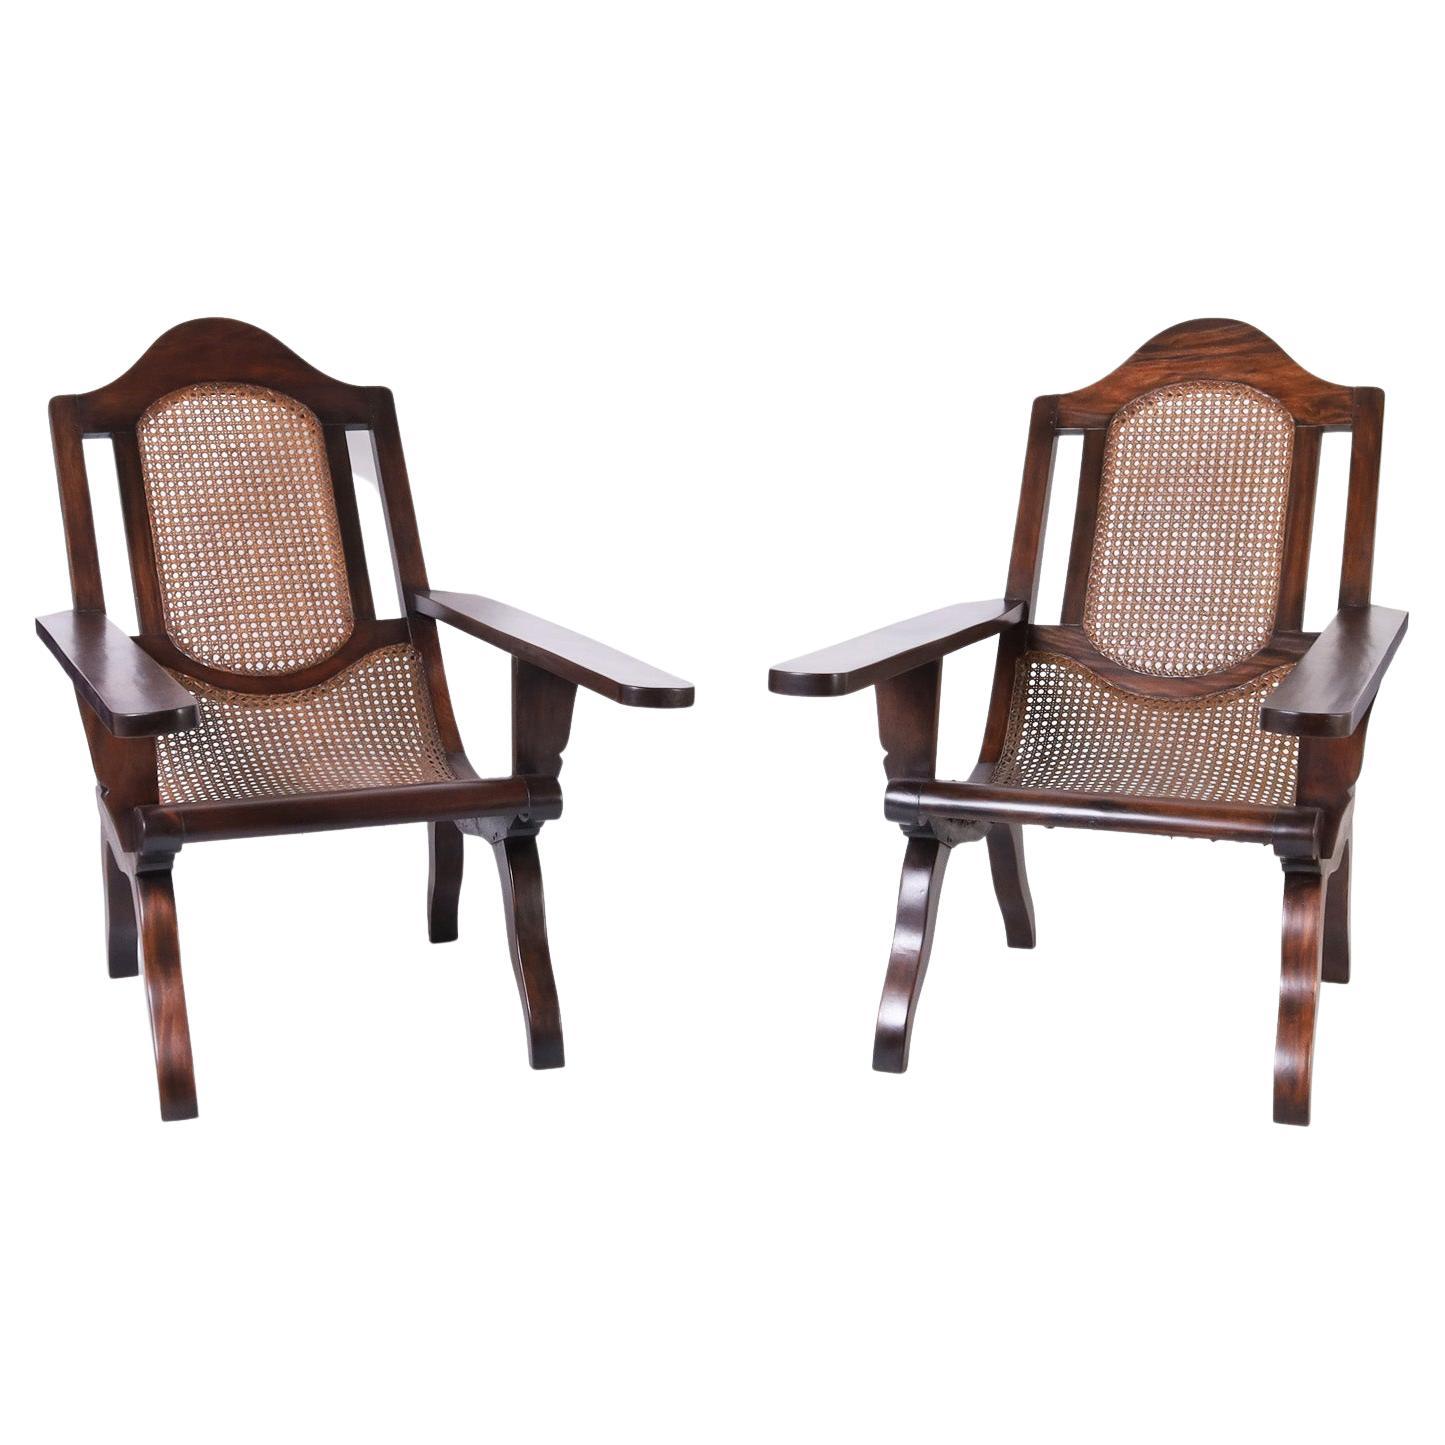 Pair of Antique Plantation Chairs